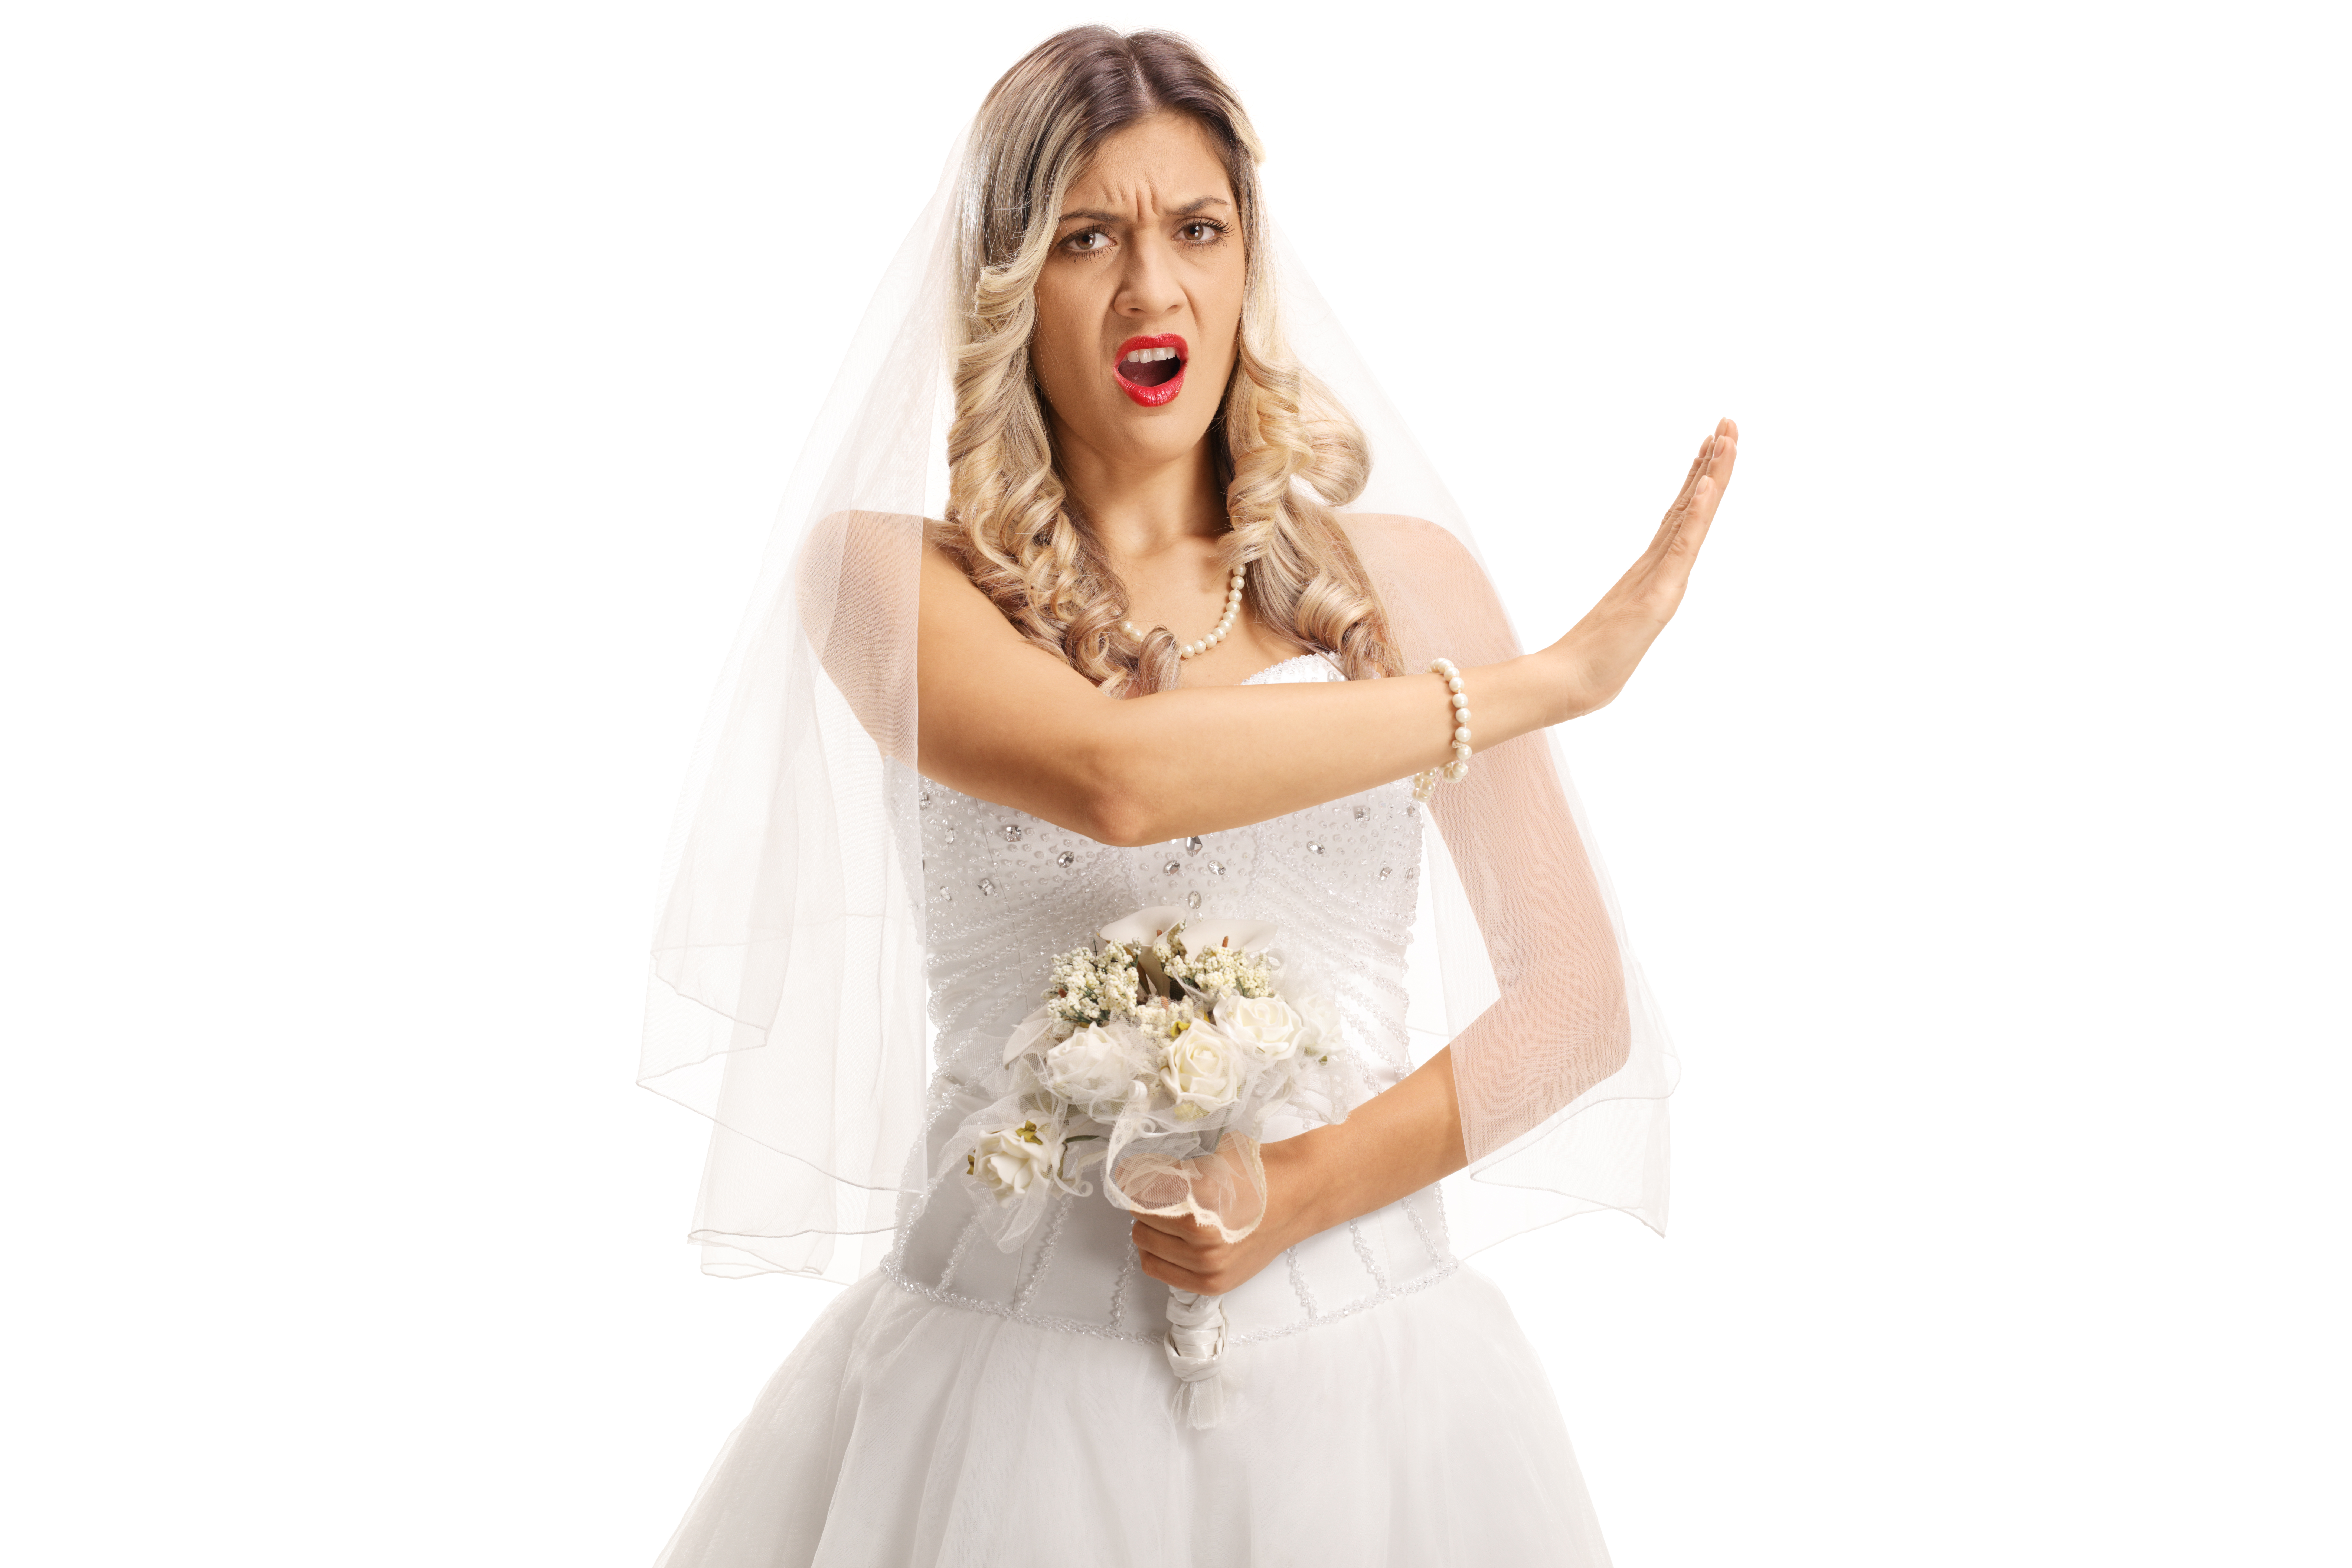 An angry bride showing someone to stop | Source: Shutterstock